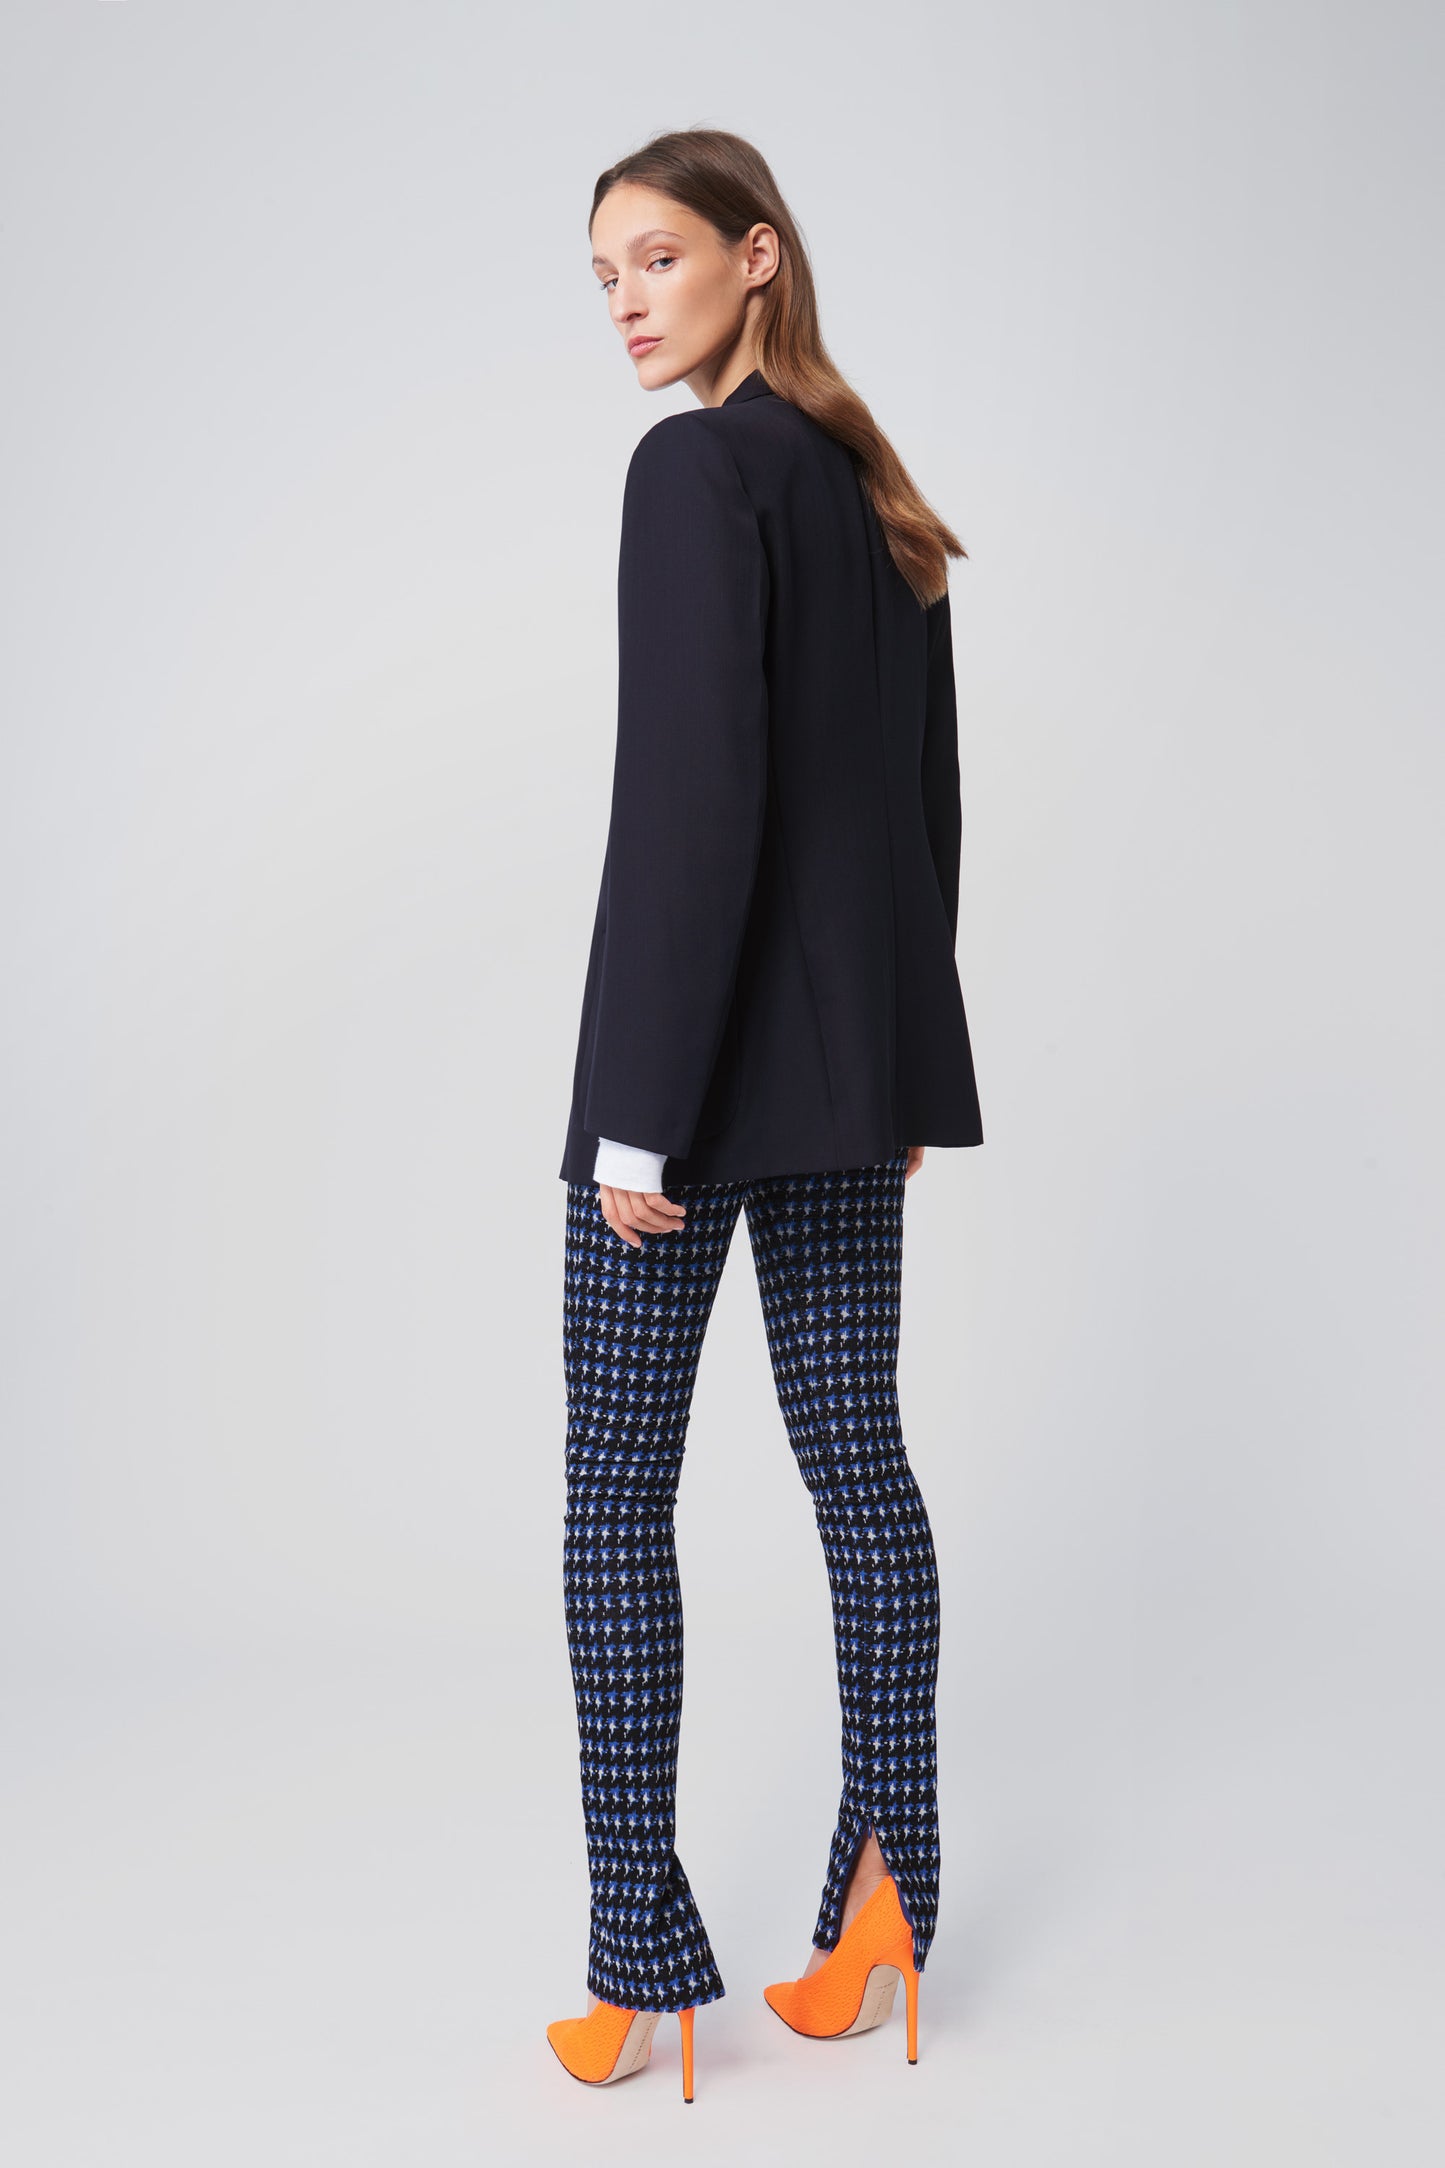 Ankle Split Trousers in Navy Houndstooth